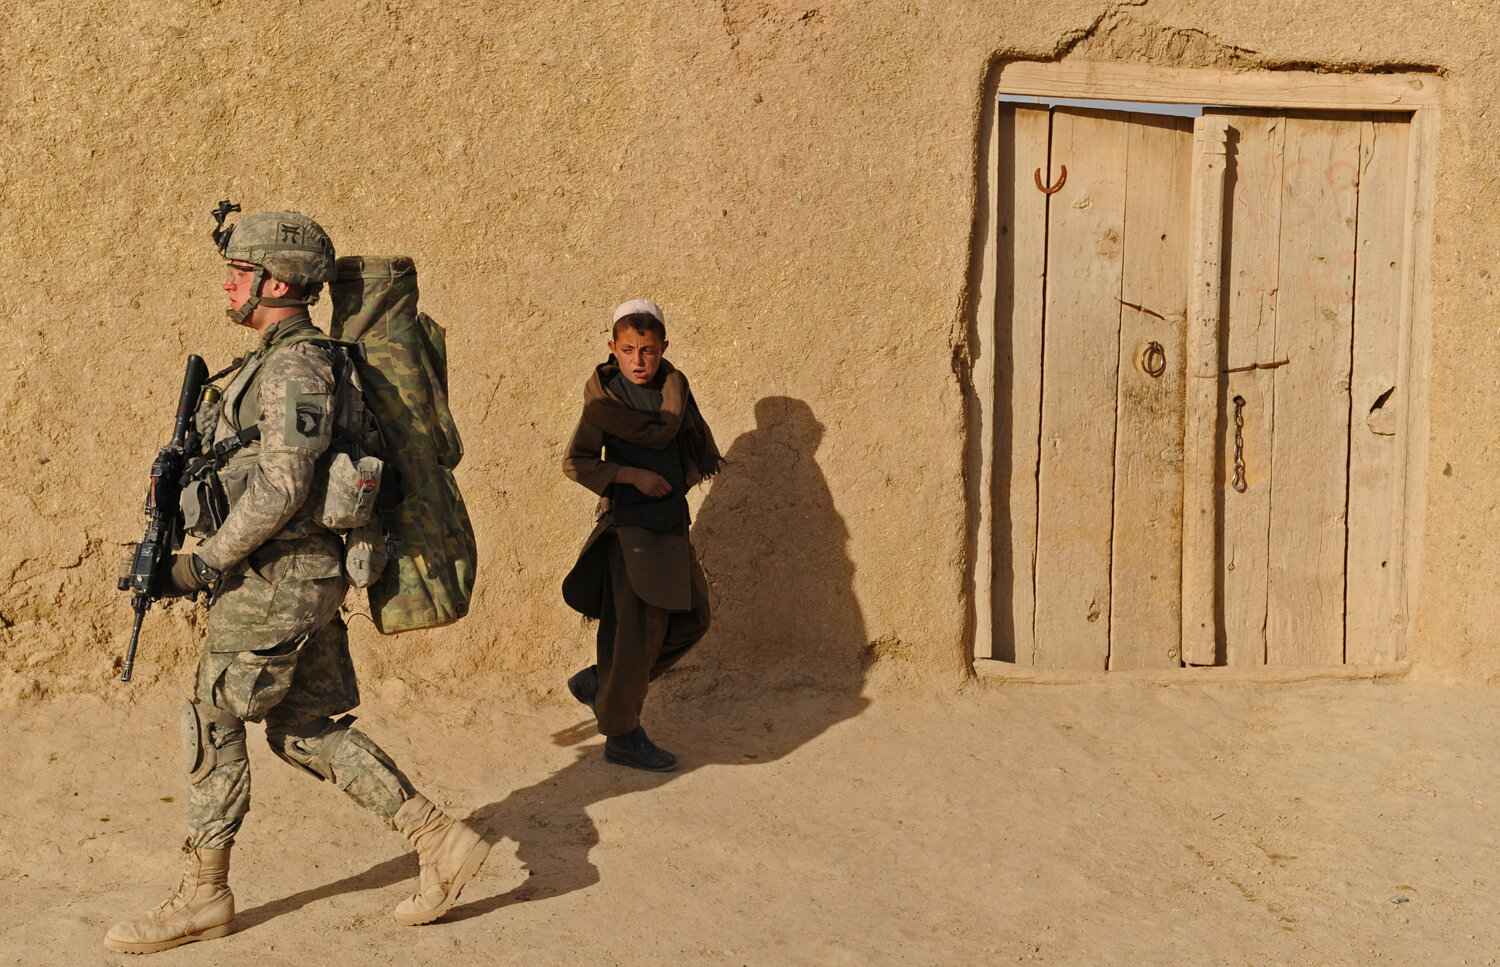  A US soldier from 1st Platoon Alpha Company 3-187 3BCT 101 Airborne walks during a patrolling in Yosef Khel district of Paktika province on April 1, 2010.  AFP PHOTO/MASSOUD Hossaini  